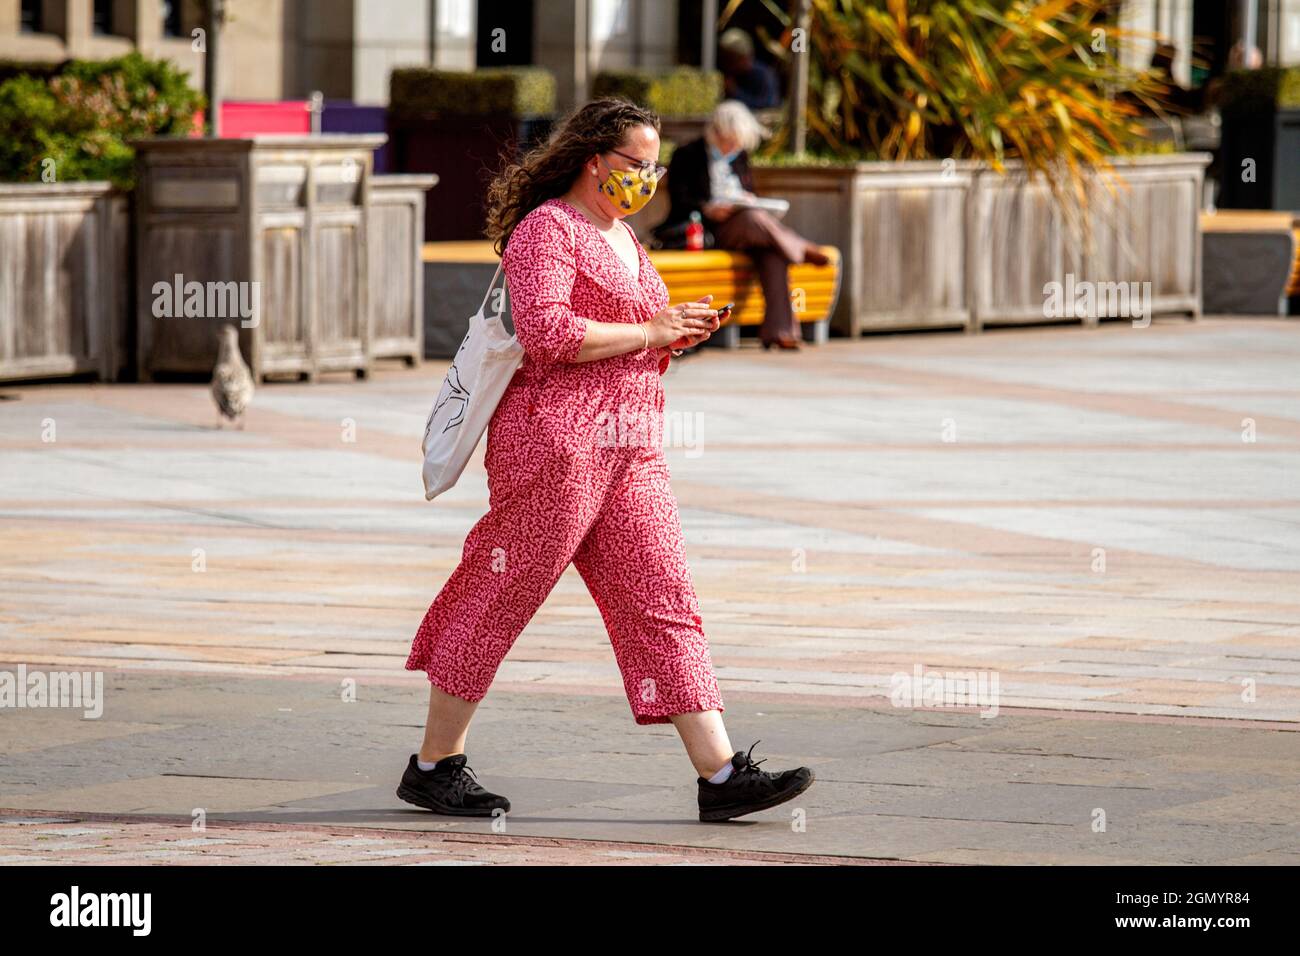 Dundee, Tayside, Scotland, UK. 21st. September 2021. UK weather: A sunny day with a strong cool  breeze across North East Scotland, temperatures reaching 17°C. A fashionable woman wearing a facemask and a pink colourful all in one outfit spending the day out enjoying the cool sunny weather whilst texting messages on her mobile phone in Dundee city centre. Credit: Dundee Photographics/Alamy Live News Stock Photo